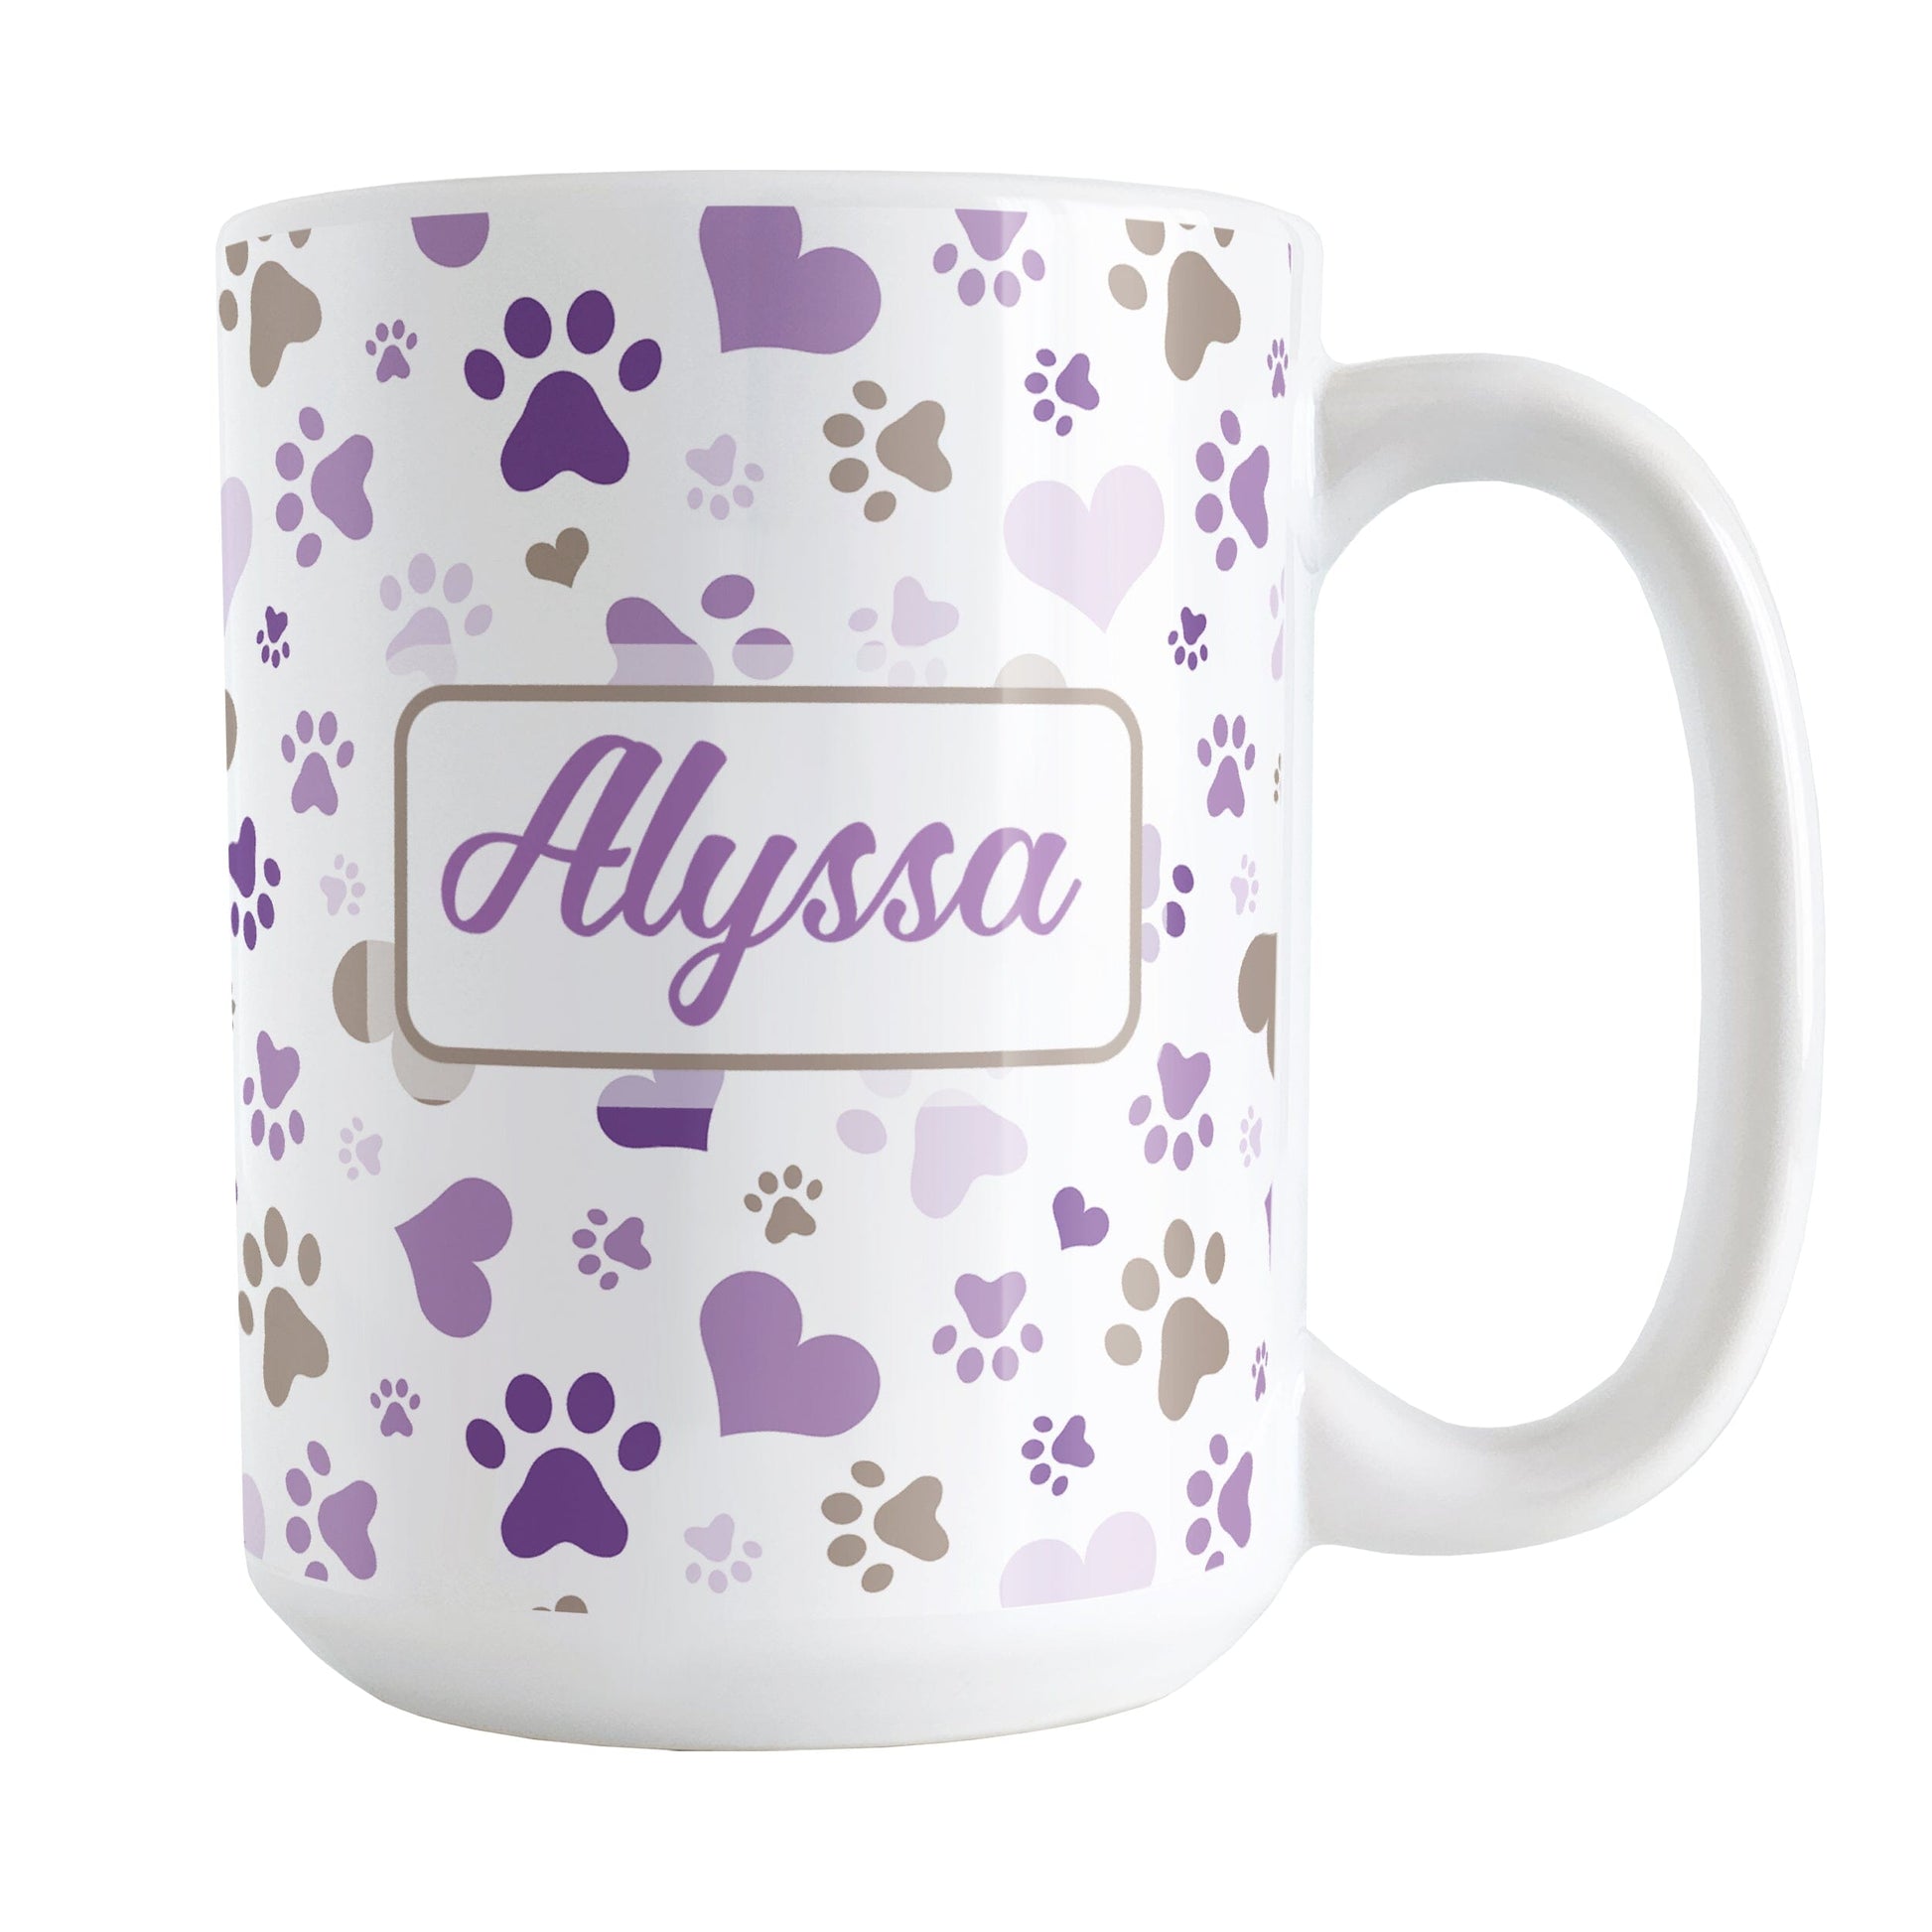 Personalized Purple Hearts and Paw Prints Mug (15oz) at Amy's Coffee Mugs. A ceramic coffee mug designed with a pattern of hearts and paw prints in brown and different shades of purple that wraps around the mug to the handle. Your personalized name is printed in purple on both sides of the mug, making it the perfect gift. This mug is perfect for people love dogs and cute paw print designs.